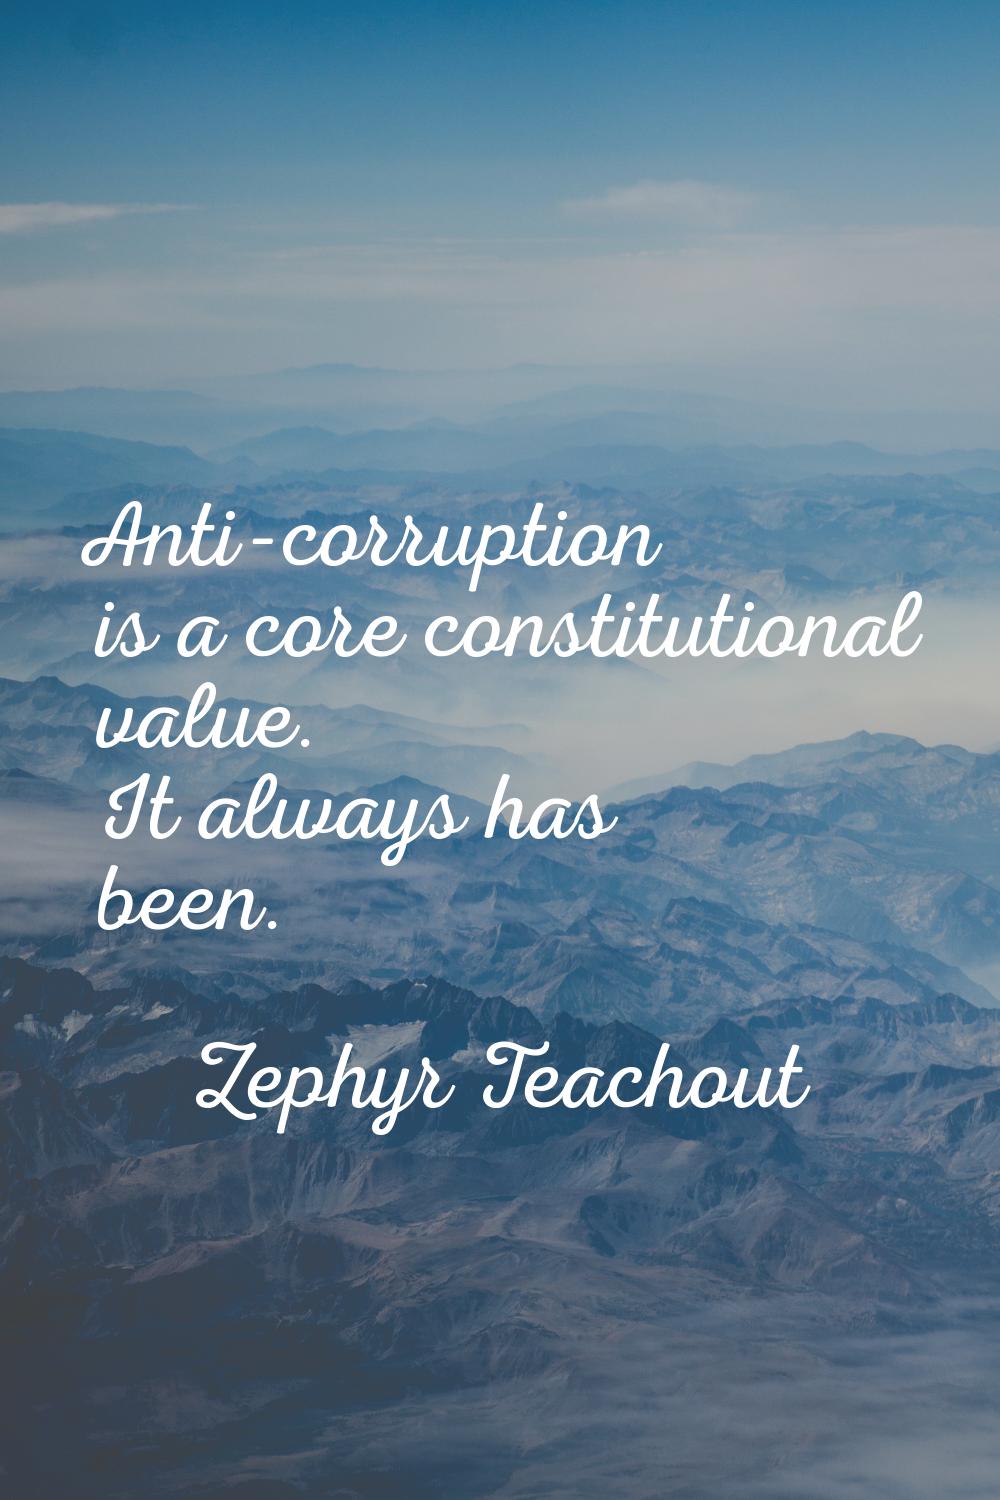 Anti-corruption is a core constitutional value. It always has been.